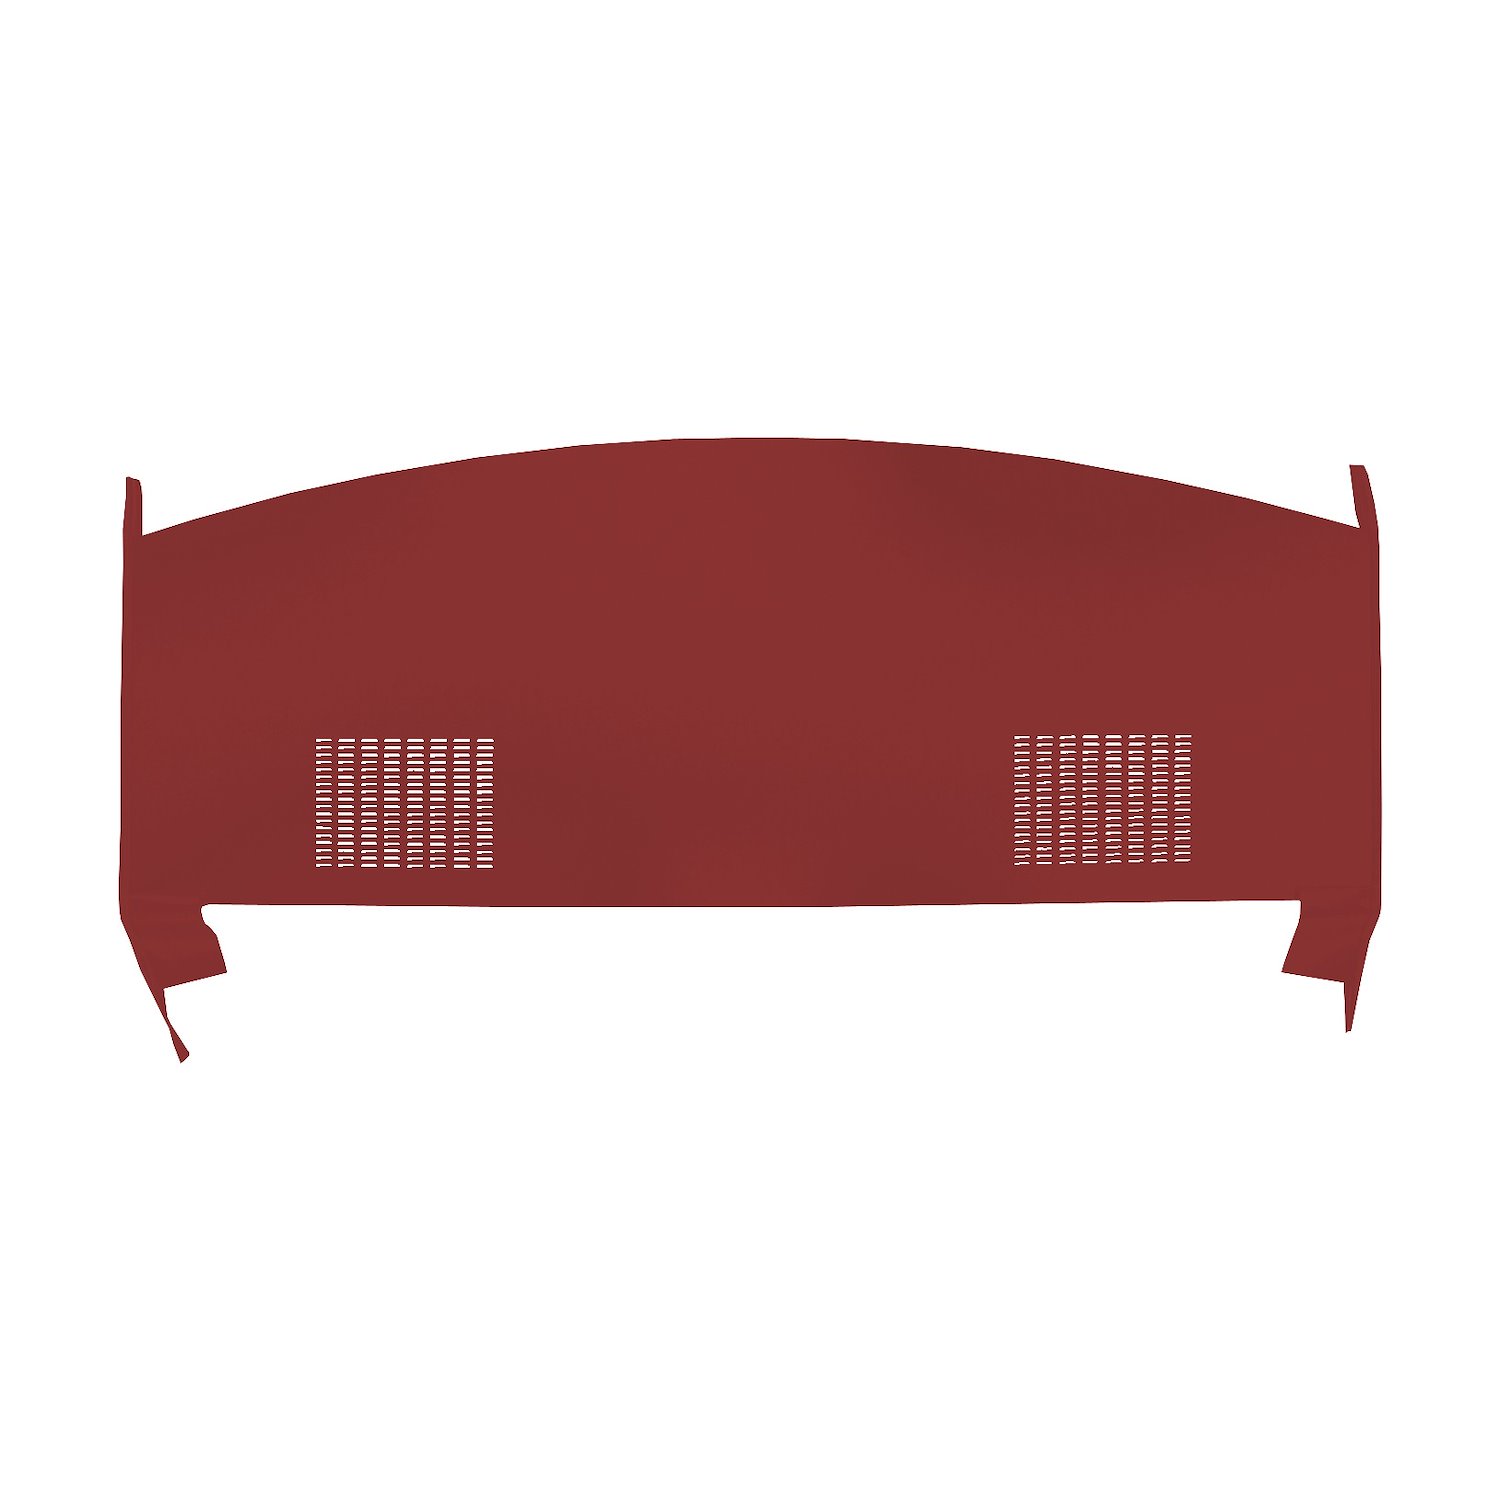 PT70CLV550 70 DUSTER/DEMON PACKAGE TRAY WITH SPEAKER CUTS - RED